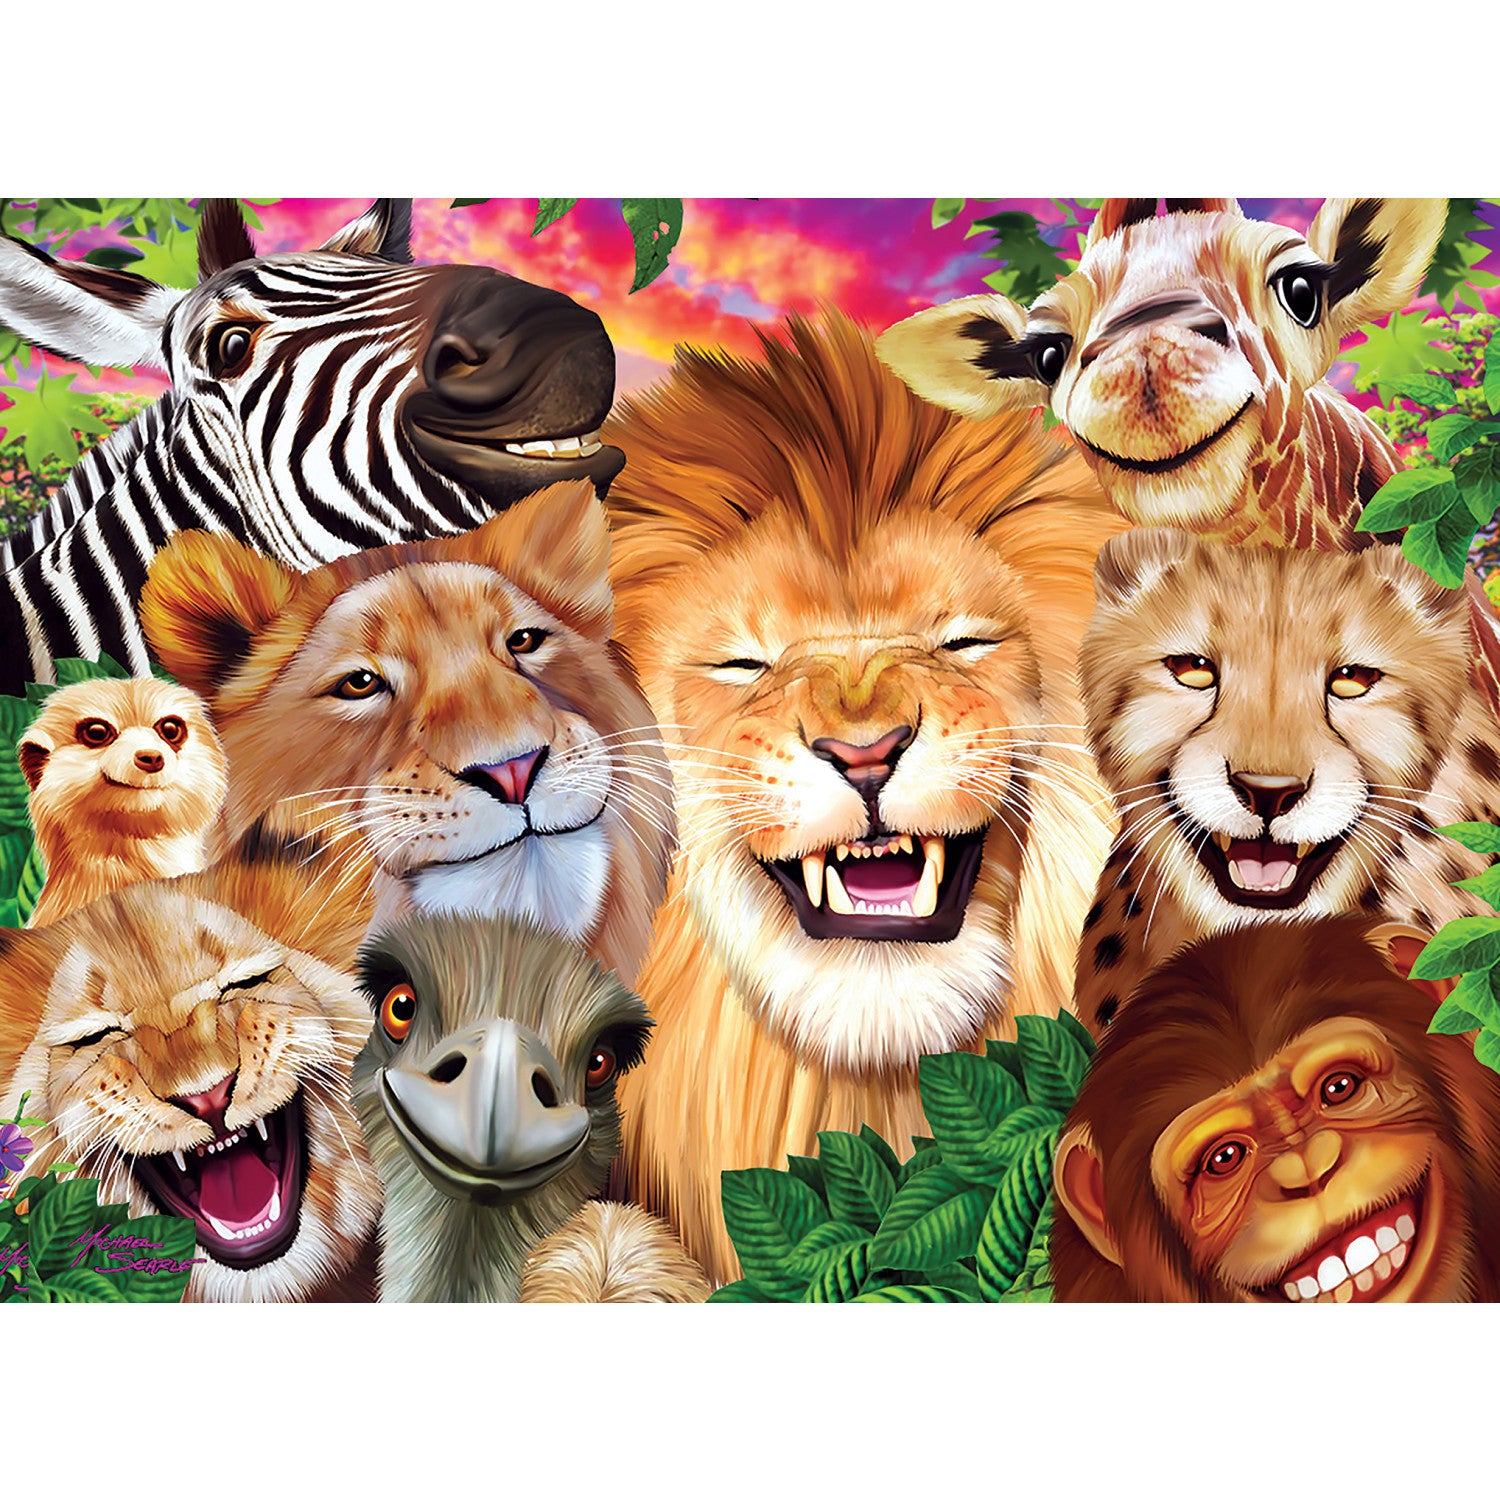 Selfies 100 Piece Jigsaw Puzzles 4-Pack